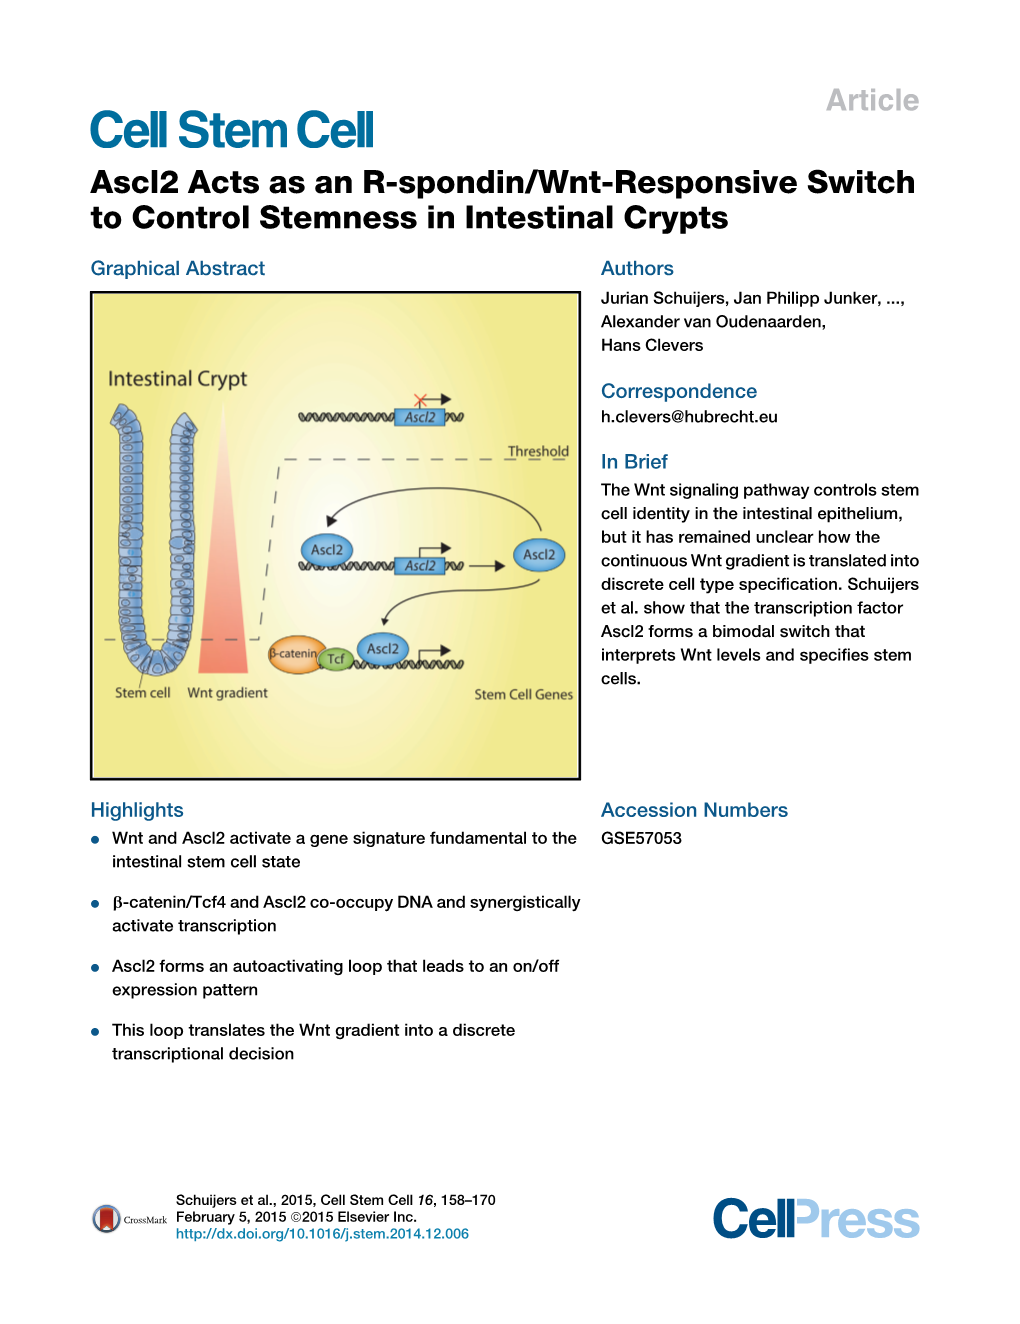 Ascl2 Acts As an R-Spondin/Wnt-Responsive Switch to Control Stemness in Intestinal Crypts